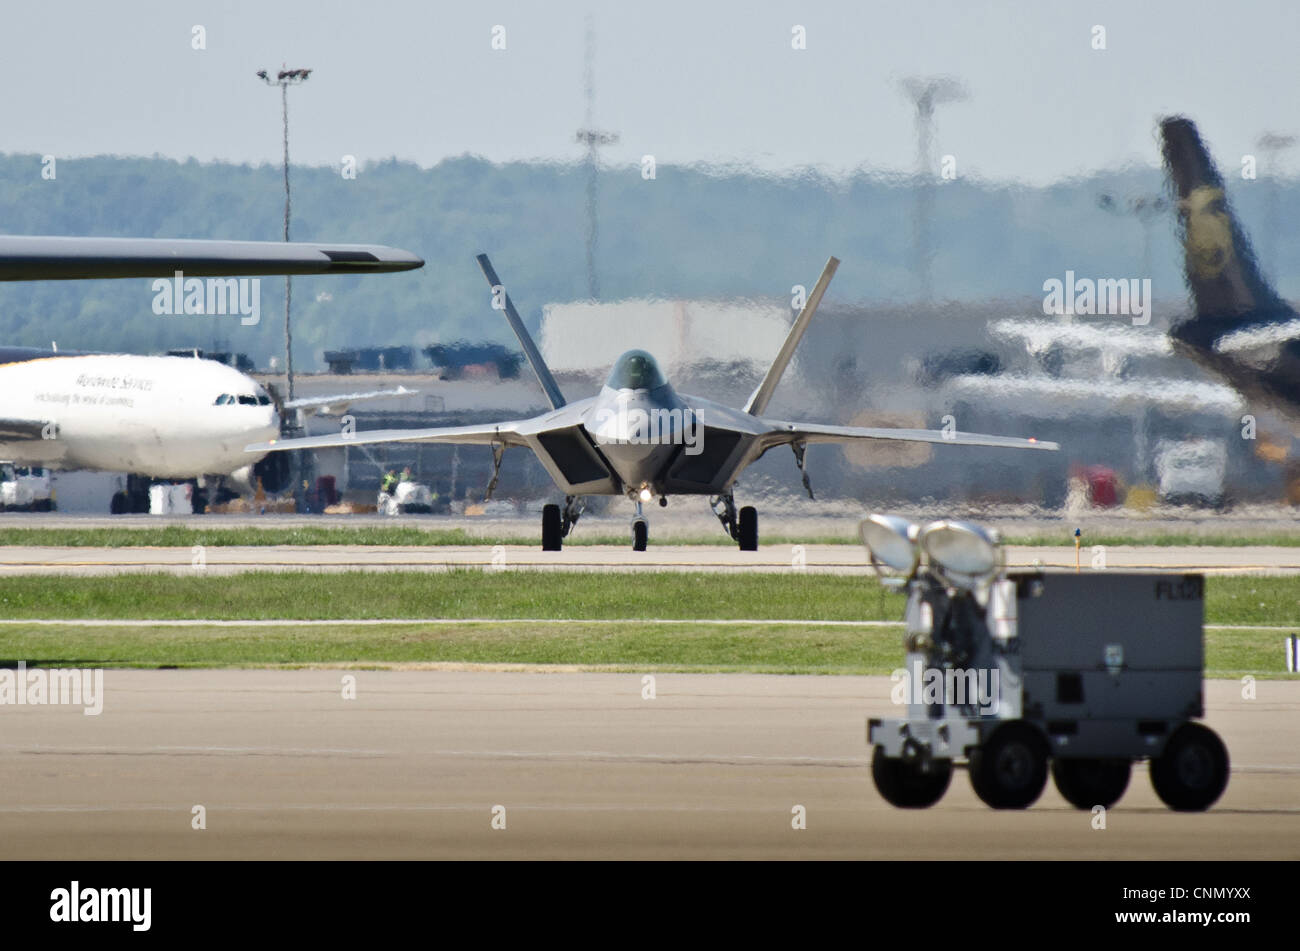 A U.S. Air Force F-22 Raptor aircraft taxies into the Kentucky Air National Guard Base in Louisville, Ky., on April 18, 2012, prior to this weekend’s 22nd annual Thunder Over Louisville air show. The Raptor is the U.S. military’s premier fighter aircraft, with capabilities that are unmatched by any other plane. Stock Photo